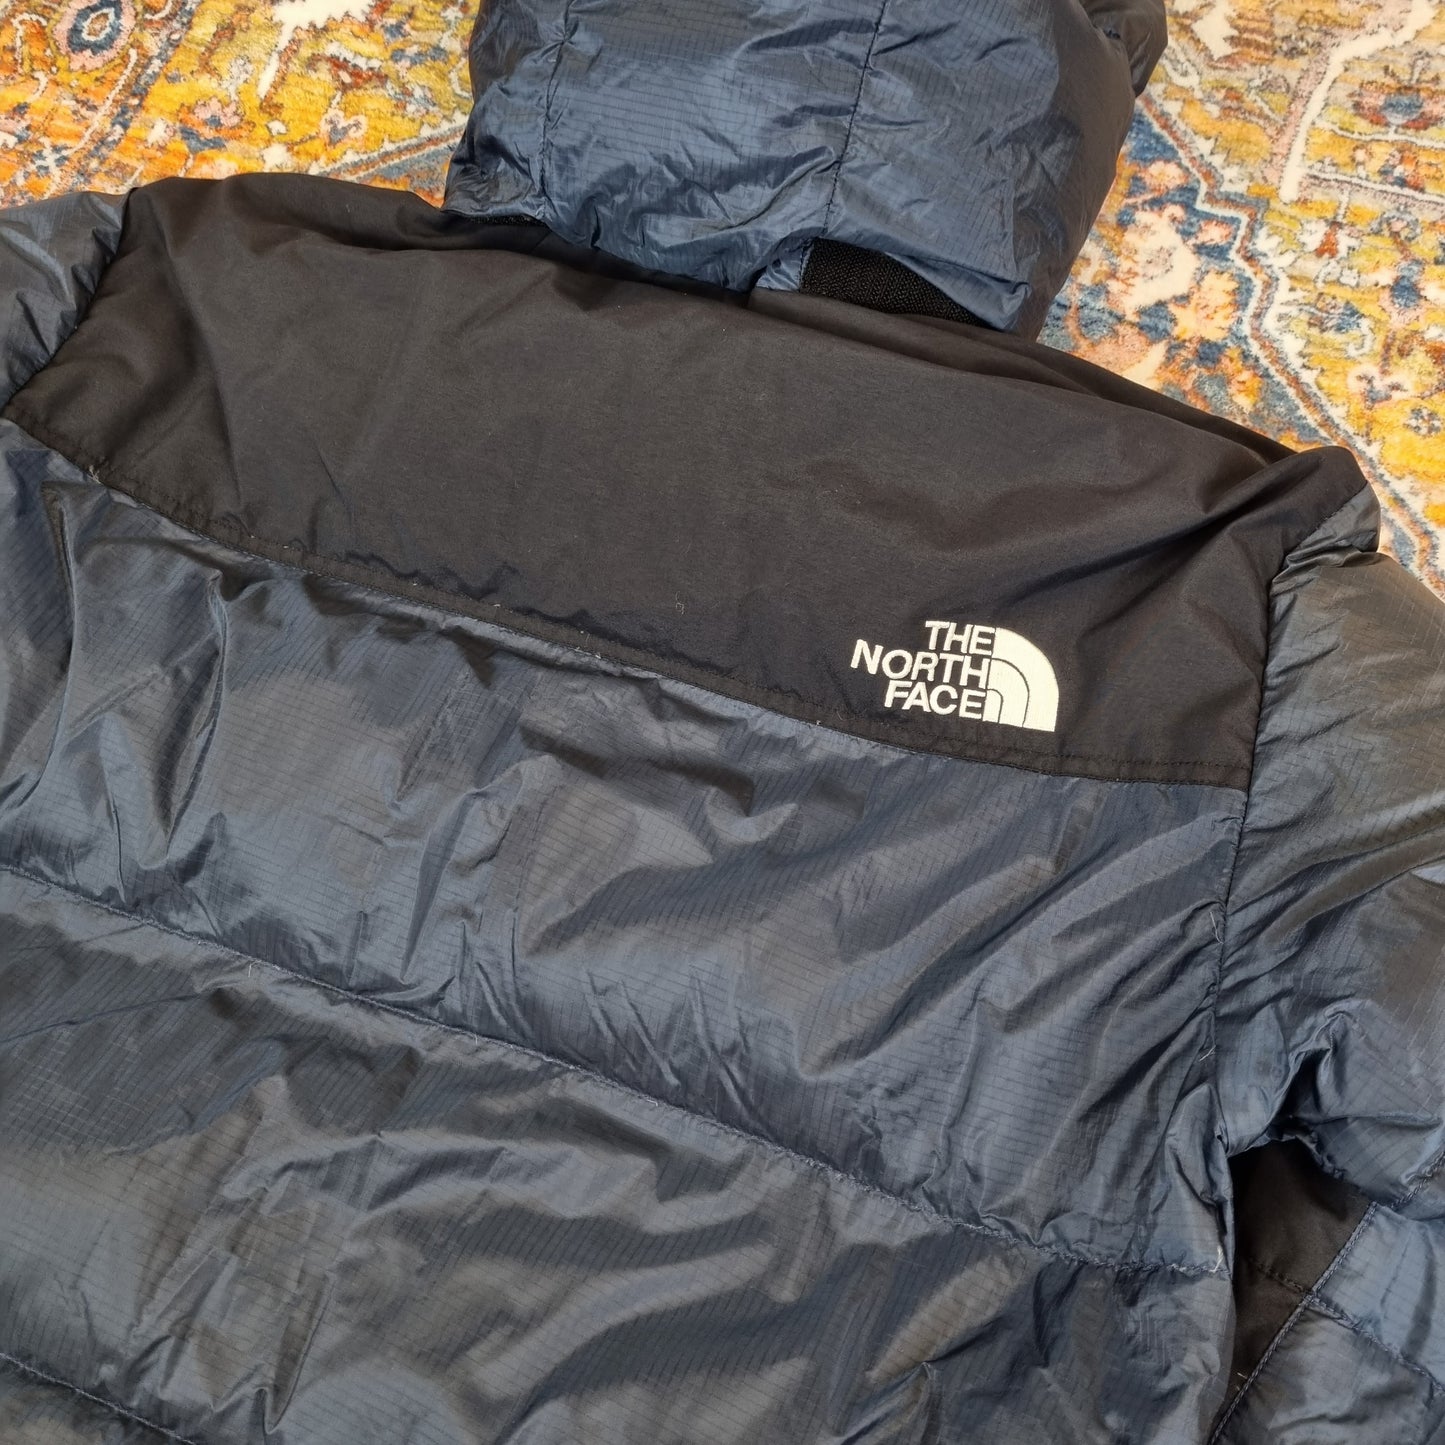 The North Face 700 Summit Series Puffer (M)